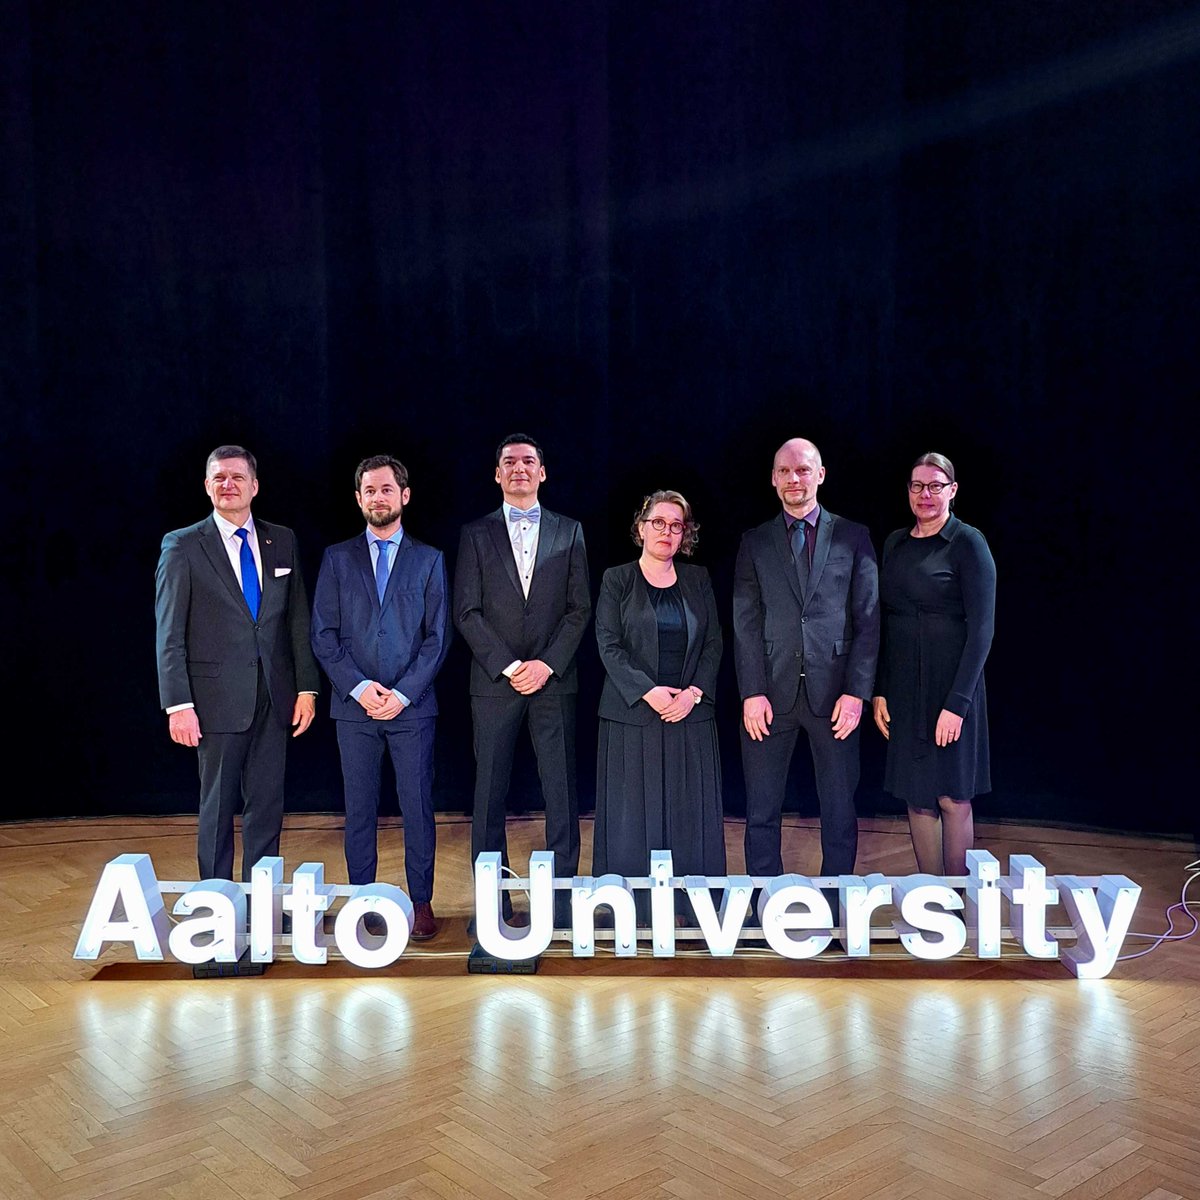 Today, with Tenured Professors' Installation Talks, we celebrate Aalto University's newly tenured professors and their expertise in and across science, art, technology, and business! Warmest congratulations! 💐 #InstallationTalks @AaltoBIZ @AaltoTechsperts